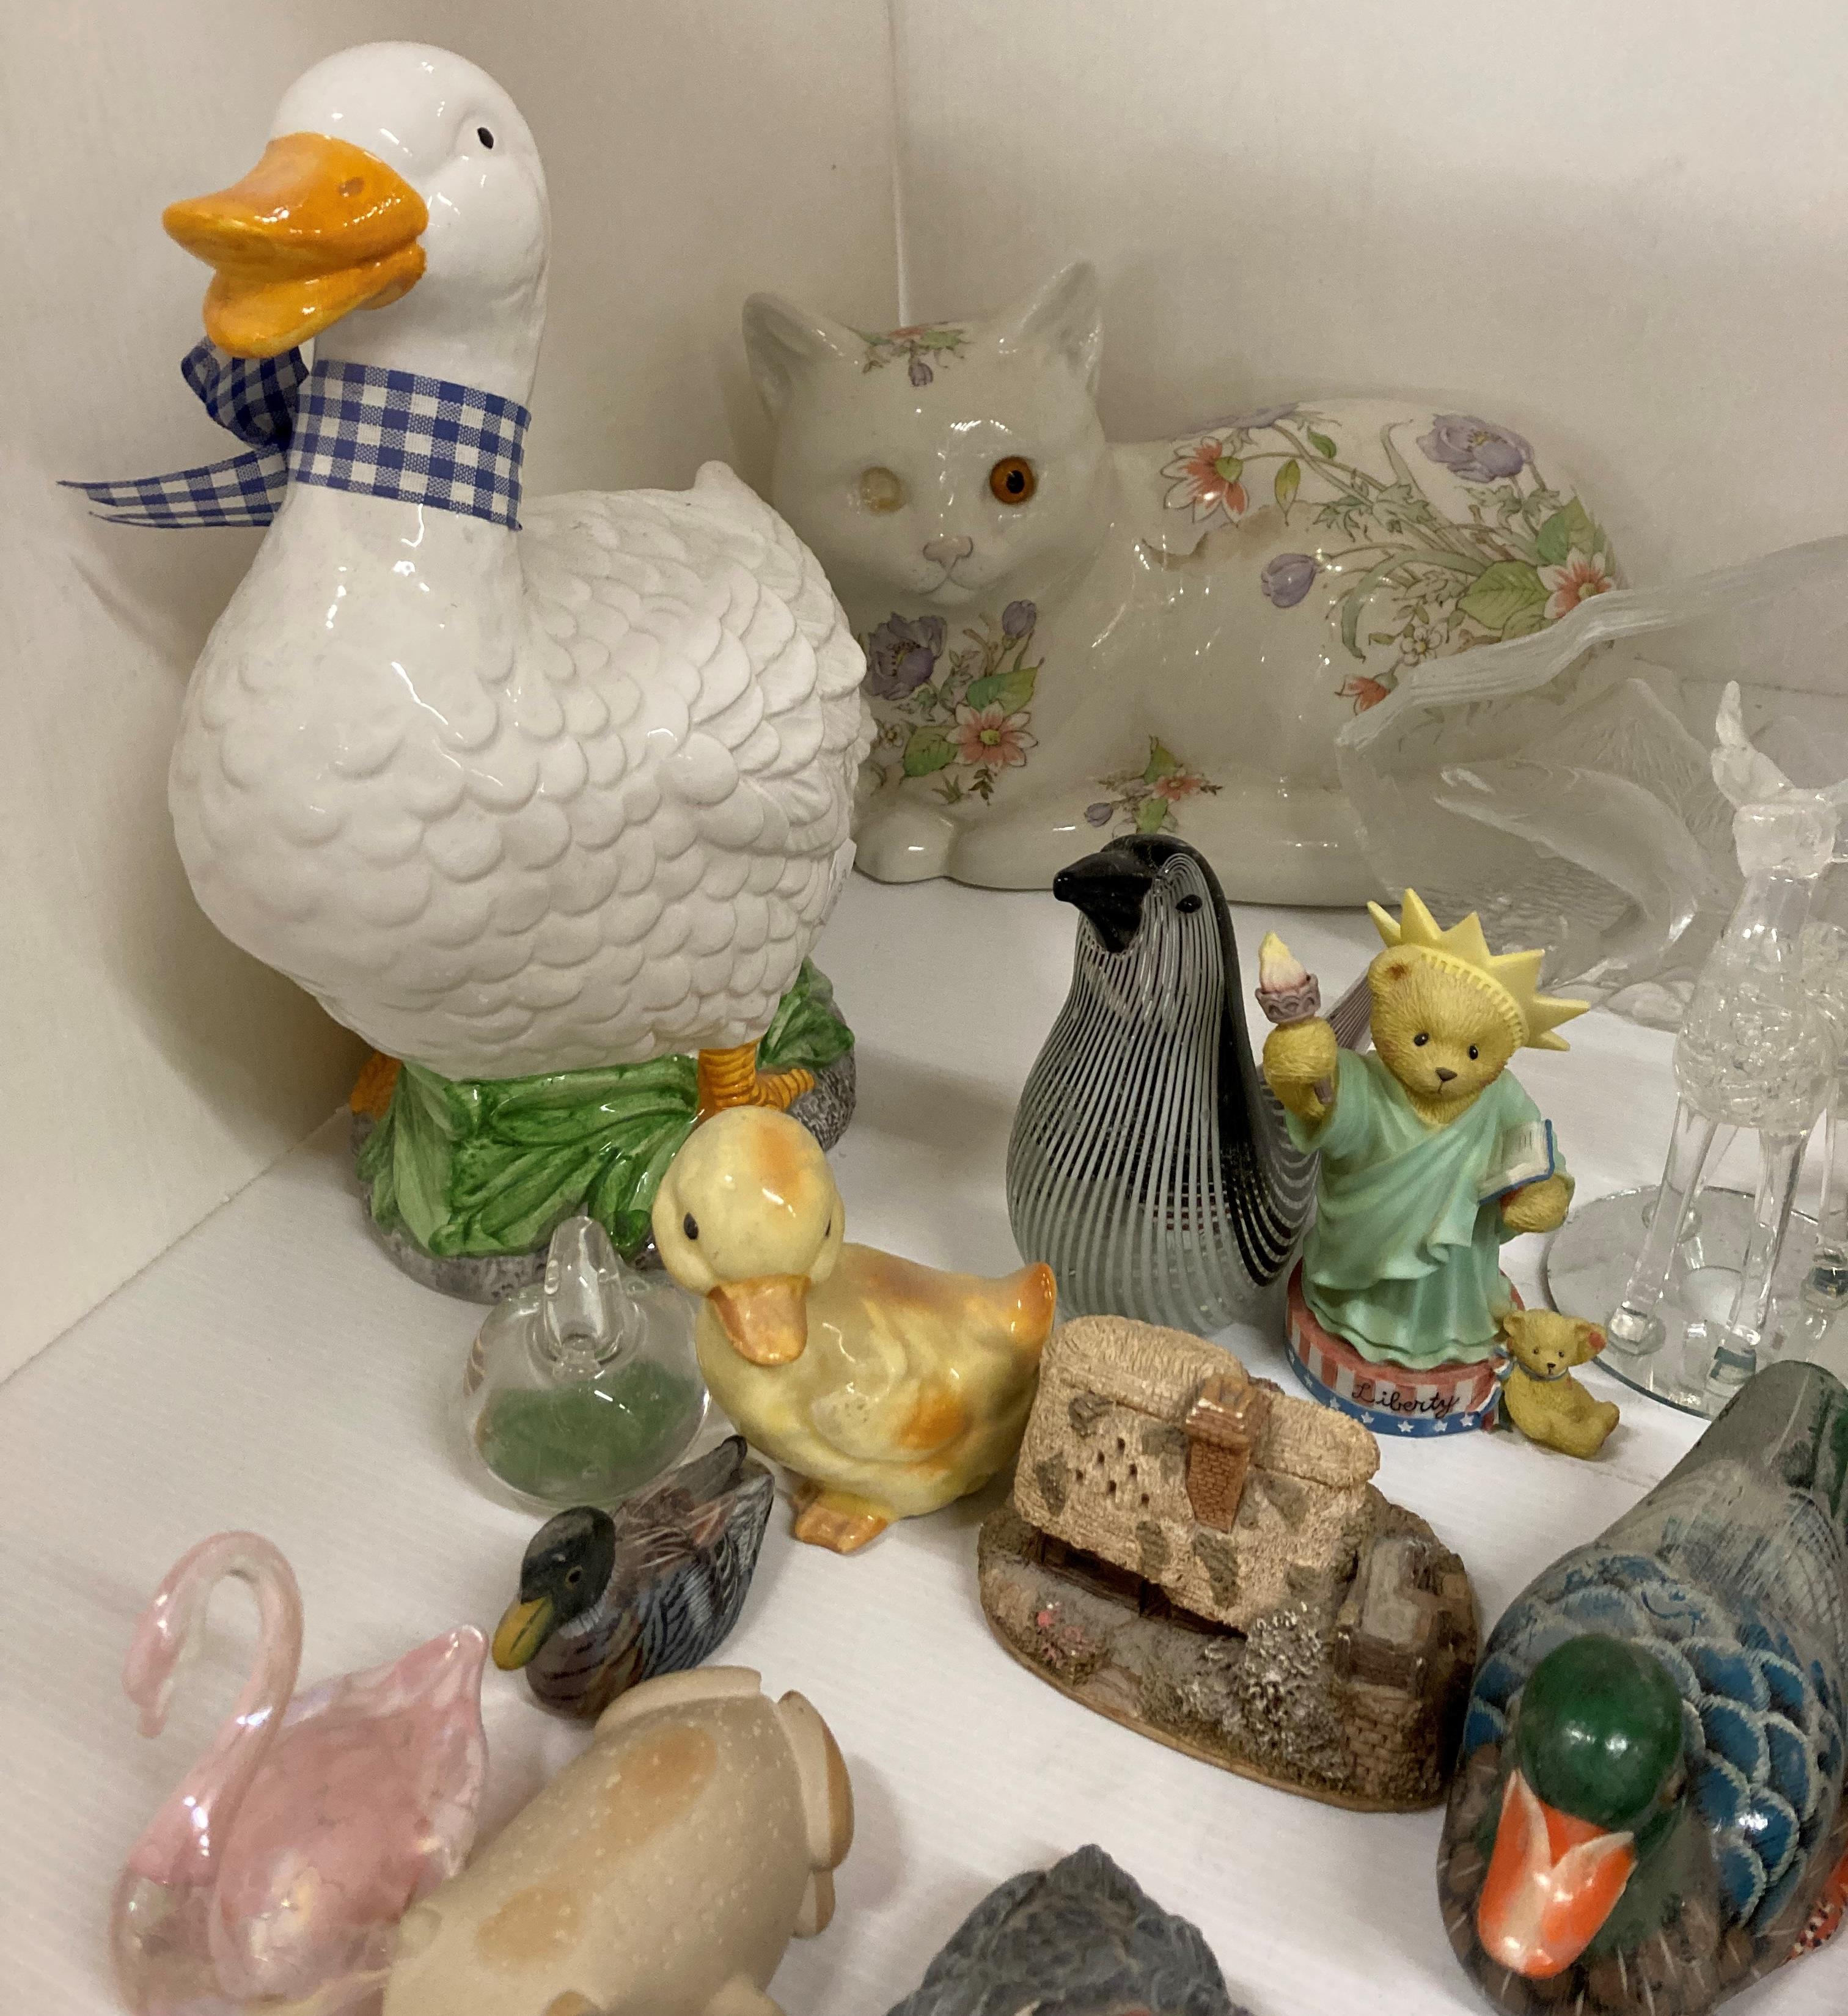 Contents to part of rack - assorted duck and bird ornaments, glass, ceramic and metal, - Image 2 of 4